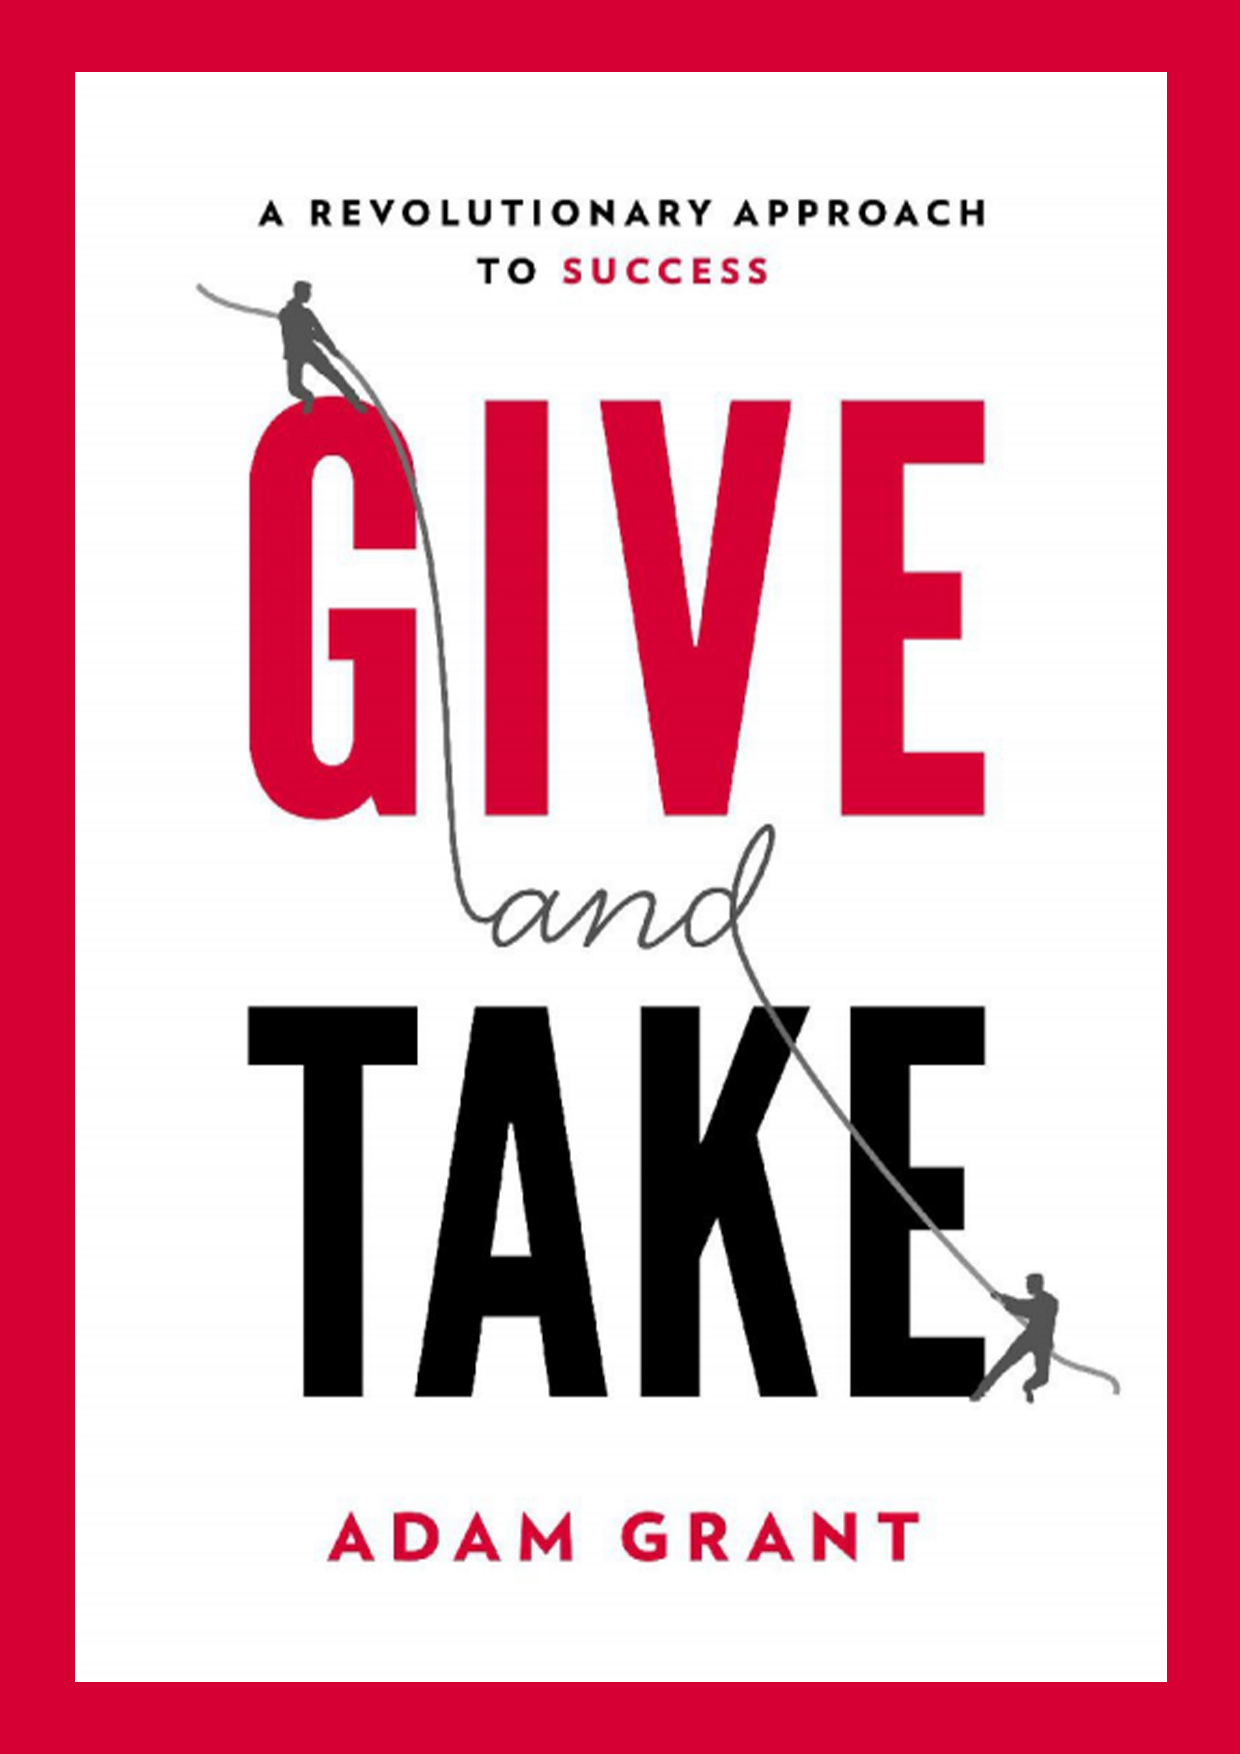 Give and take by Adam Grant PDF Free DOwnload Online